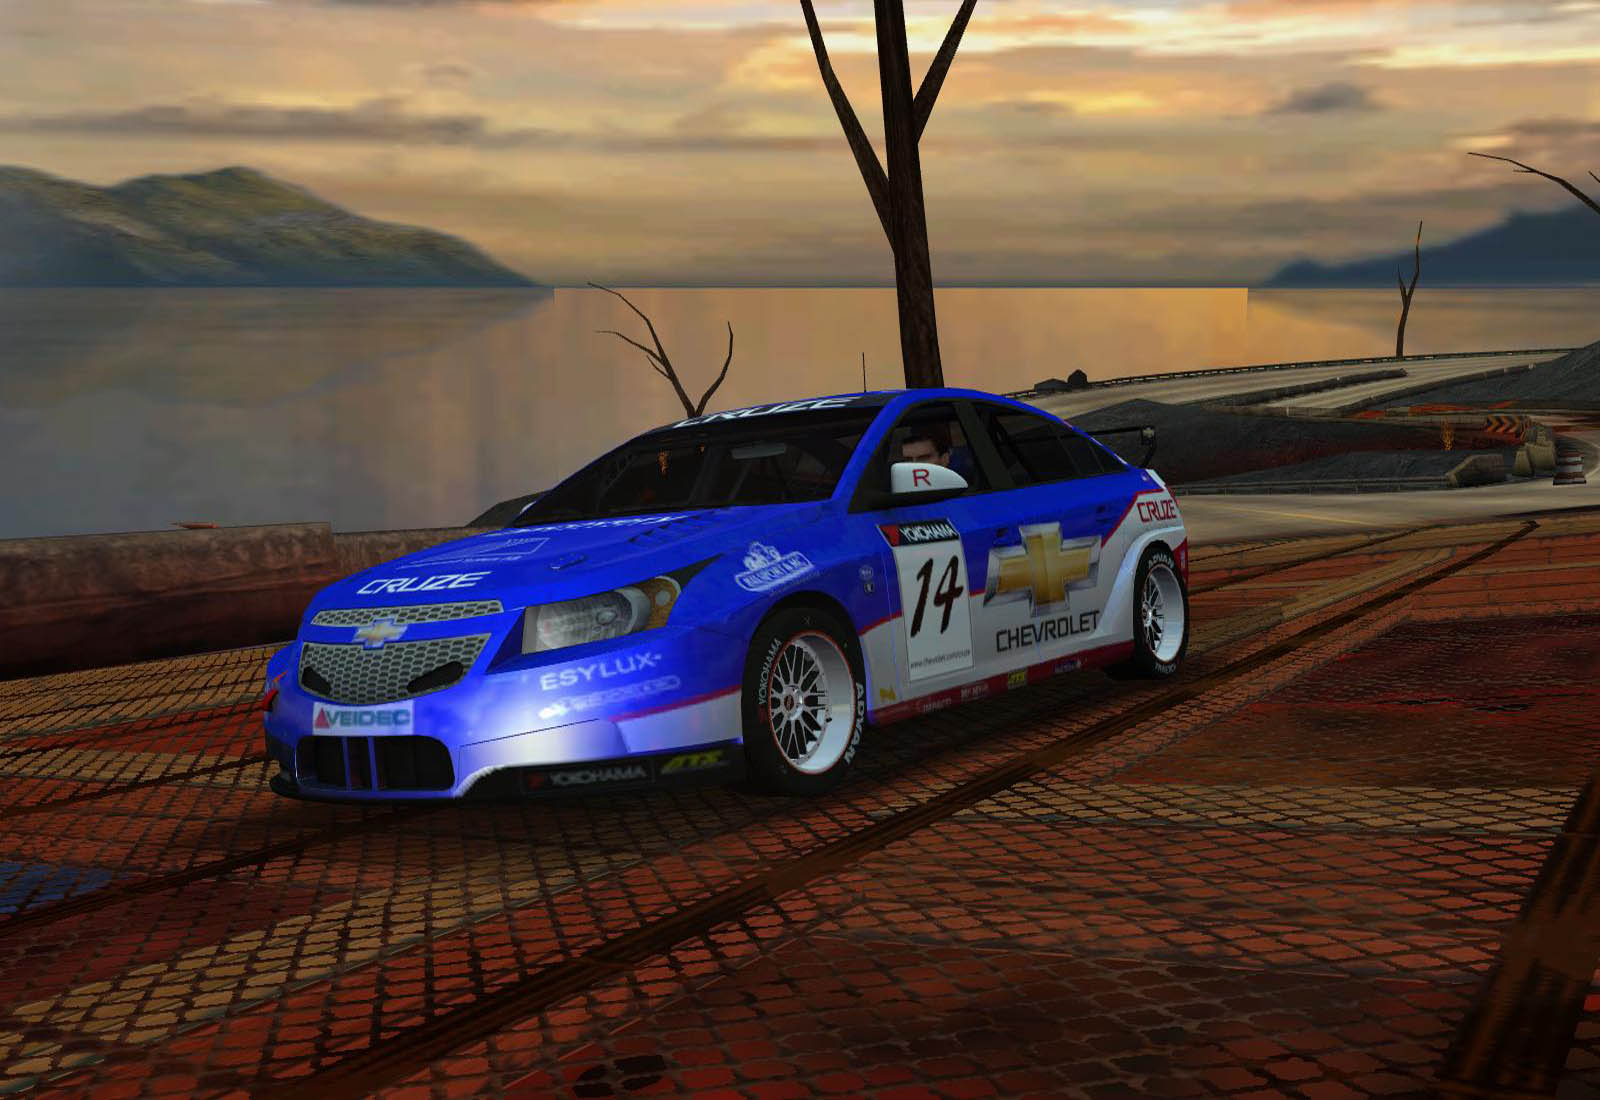 Need For Speed Hot Pursuit 2 Chevrolet Cruze Race Car